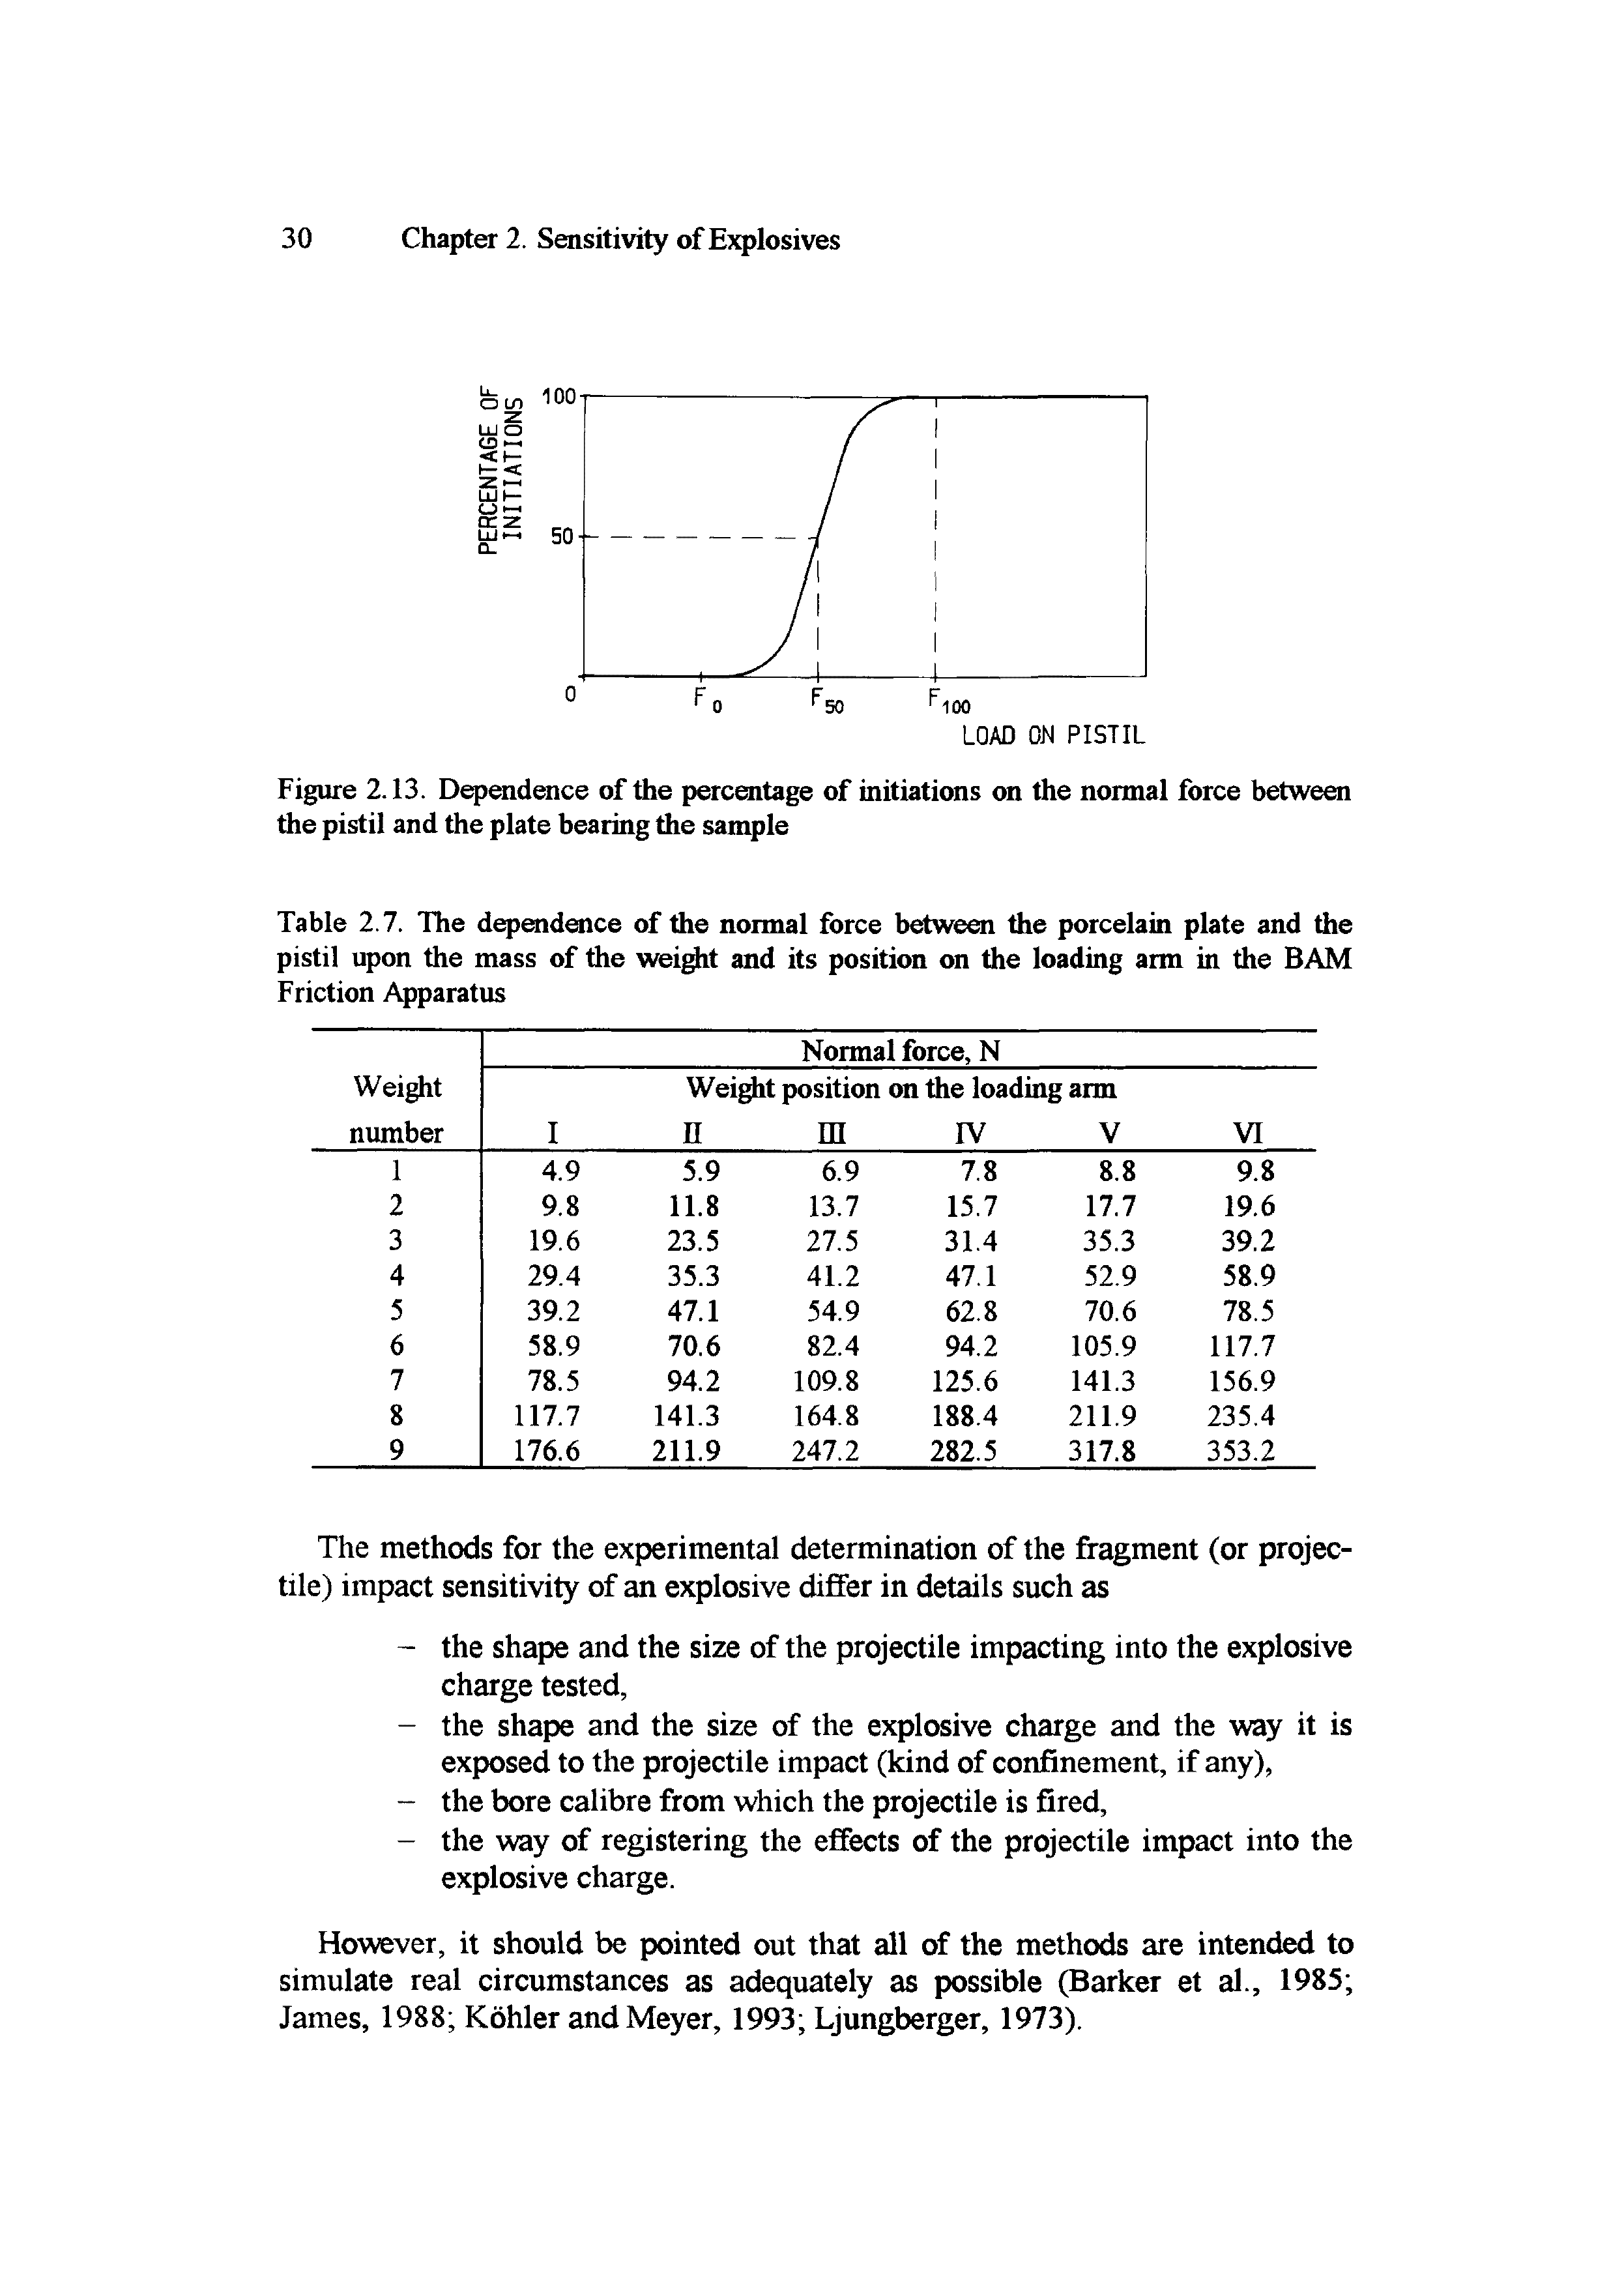 Table 2.7. The dependence of the normal force between the porcelain plate and the pistil upon the mass of the weight and its position on the loading atm in the BAM Friction Apparatus...